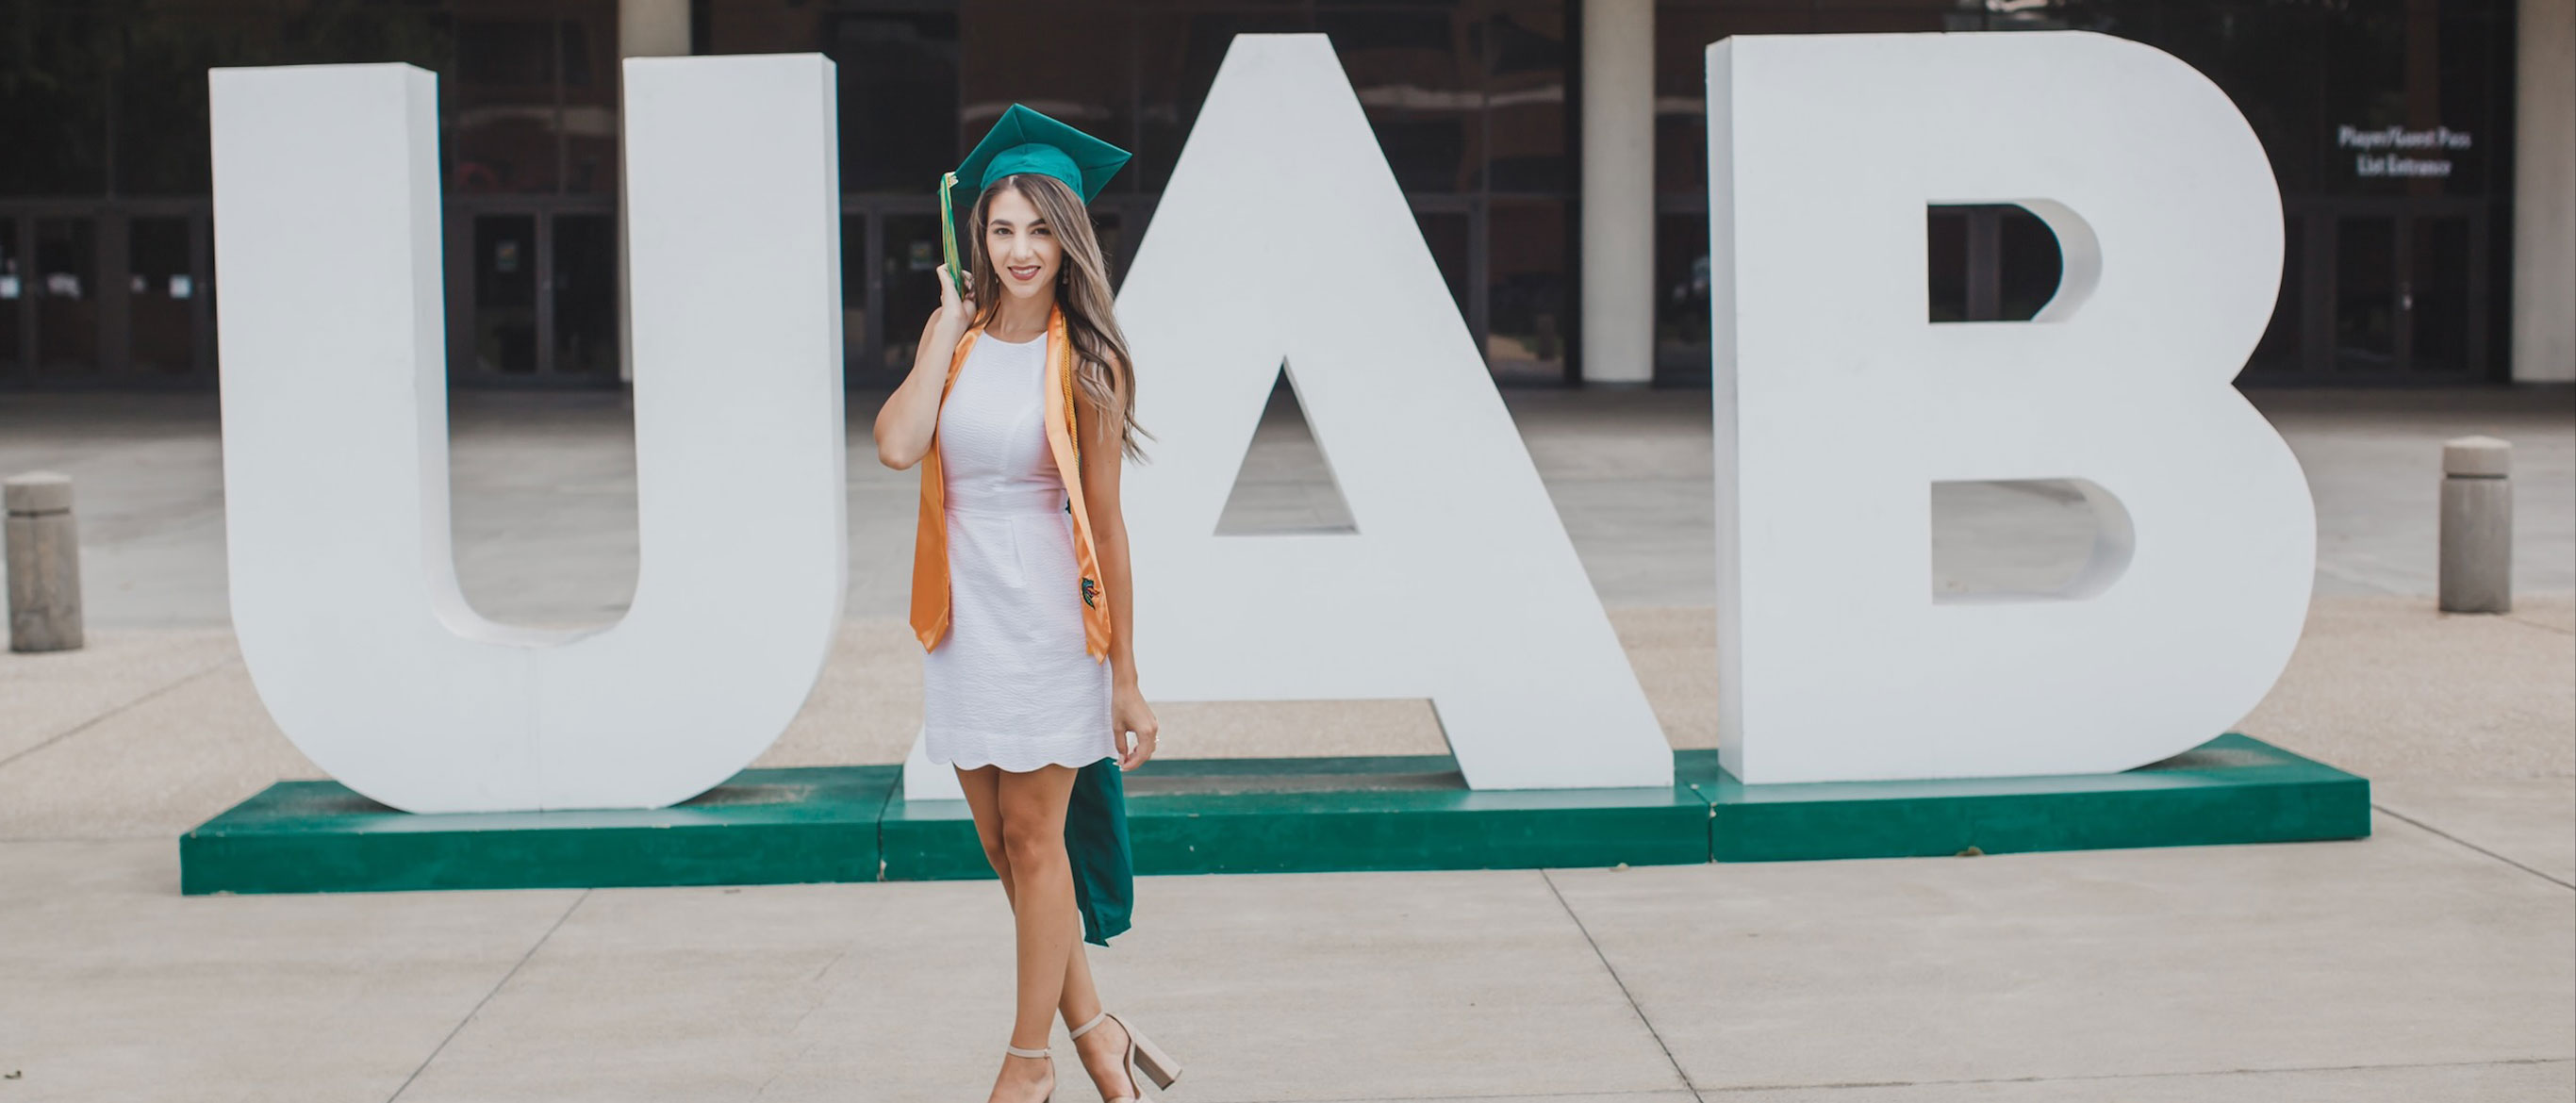 Christy posing in graduation cap in front of UAB lettering.